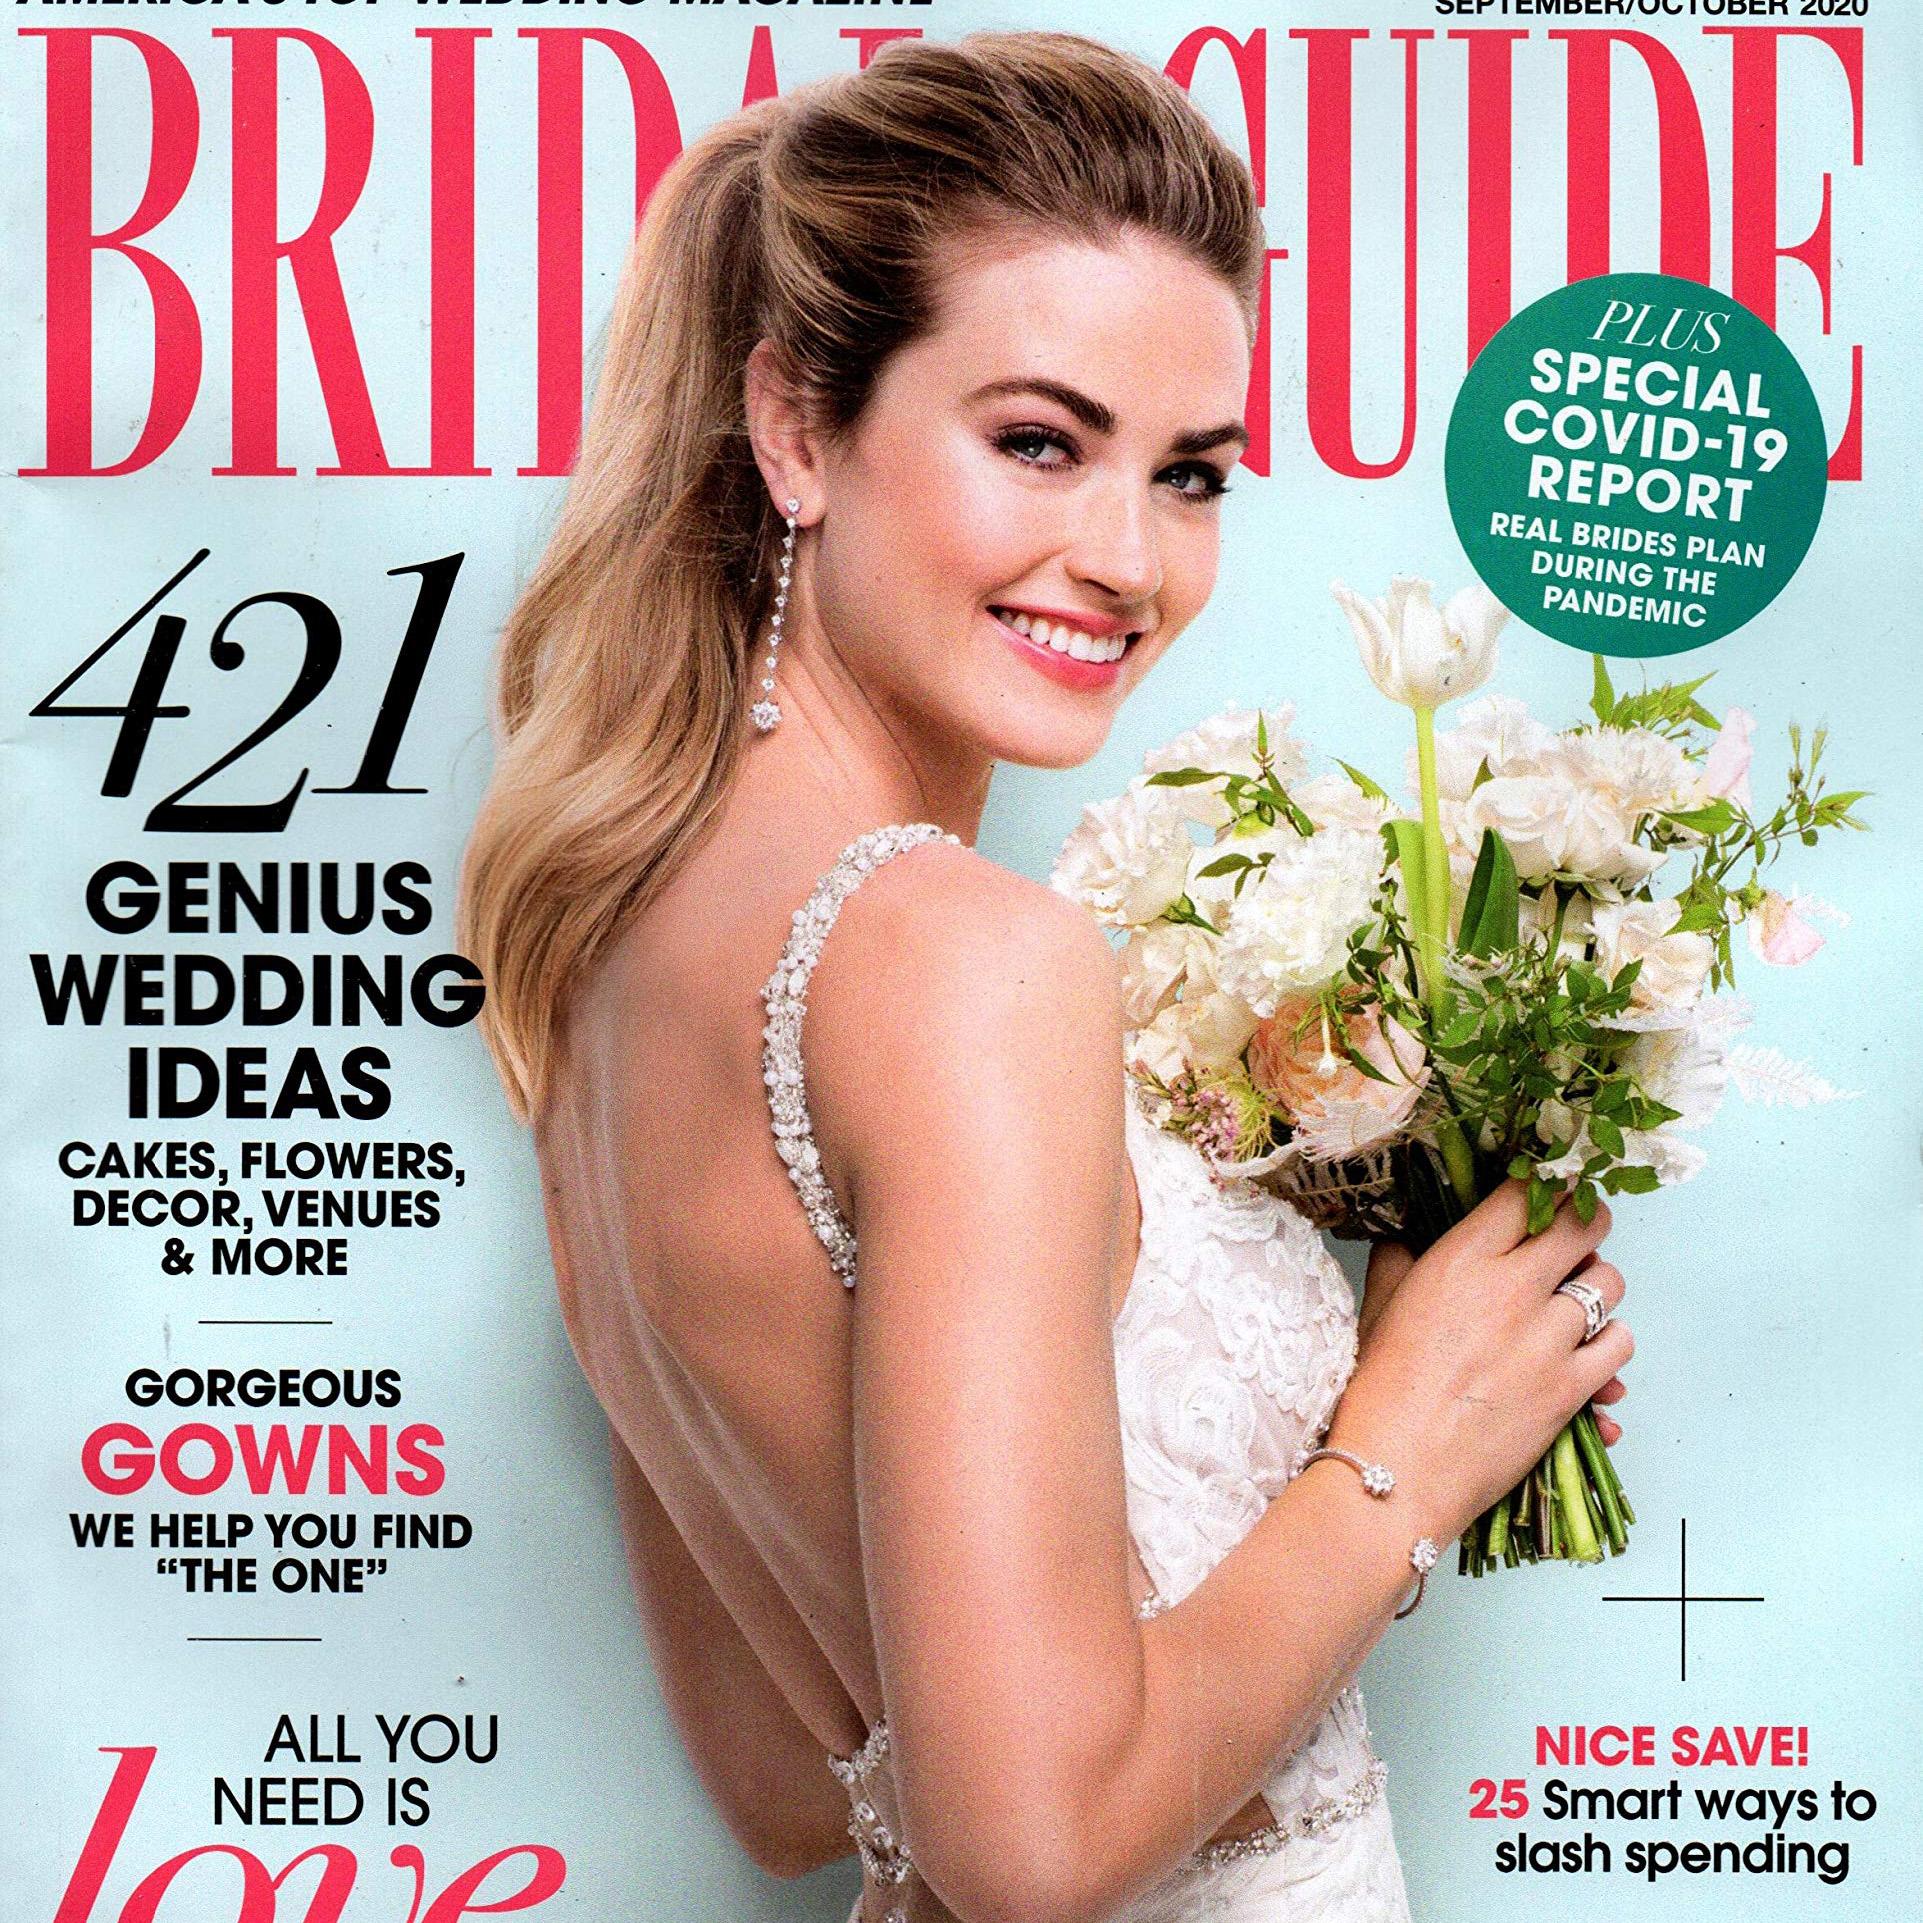 Bridal Guide Magazine Subscription for $4.80